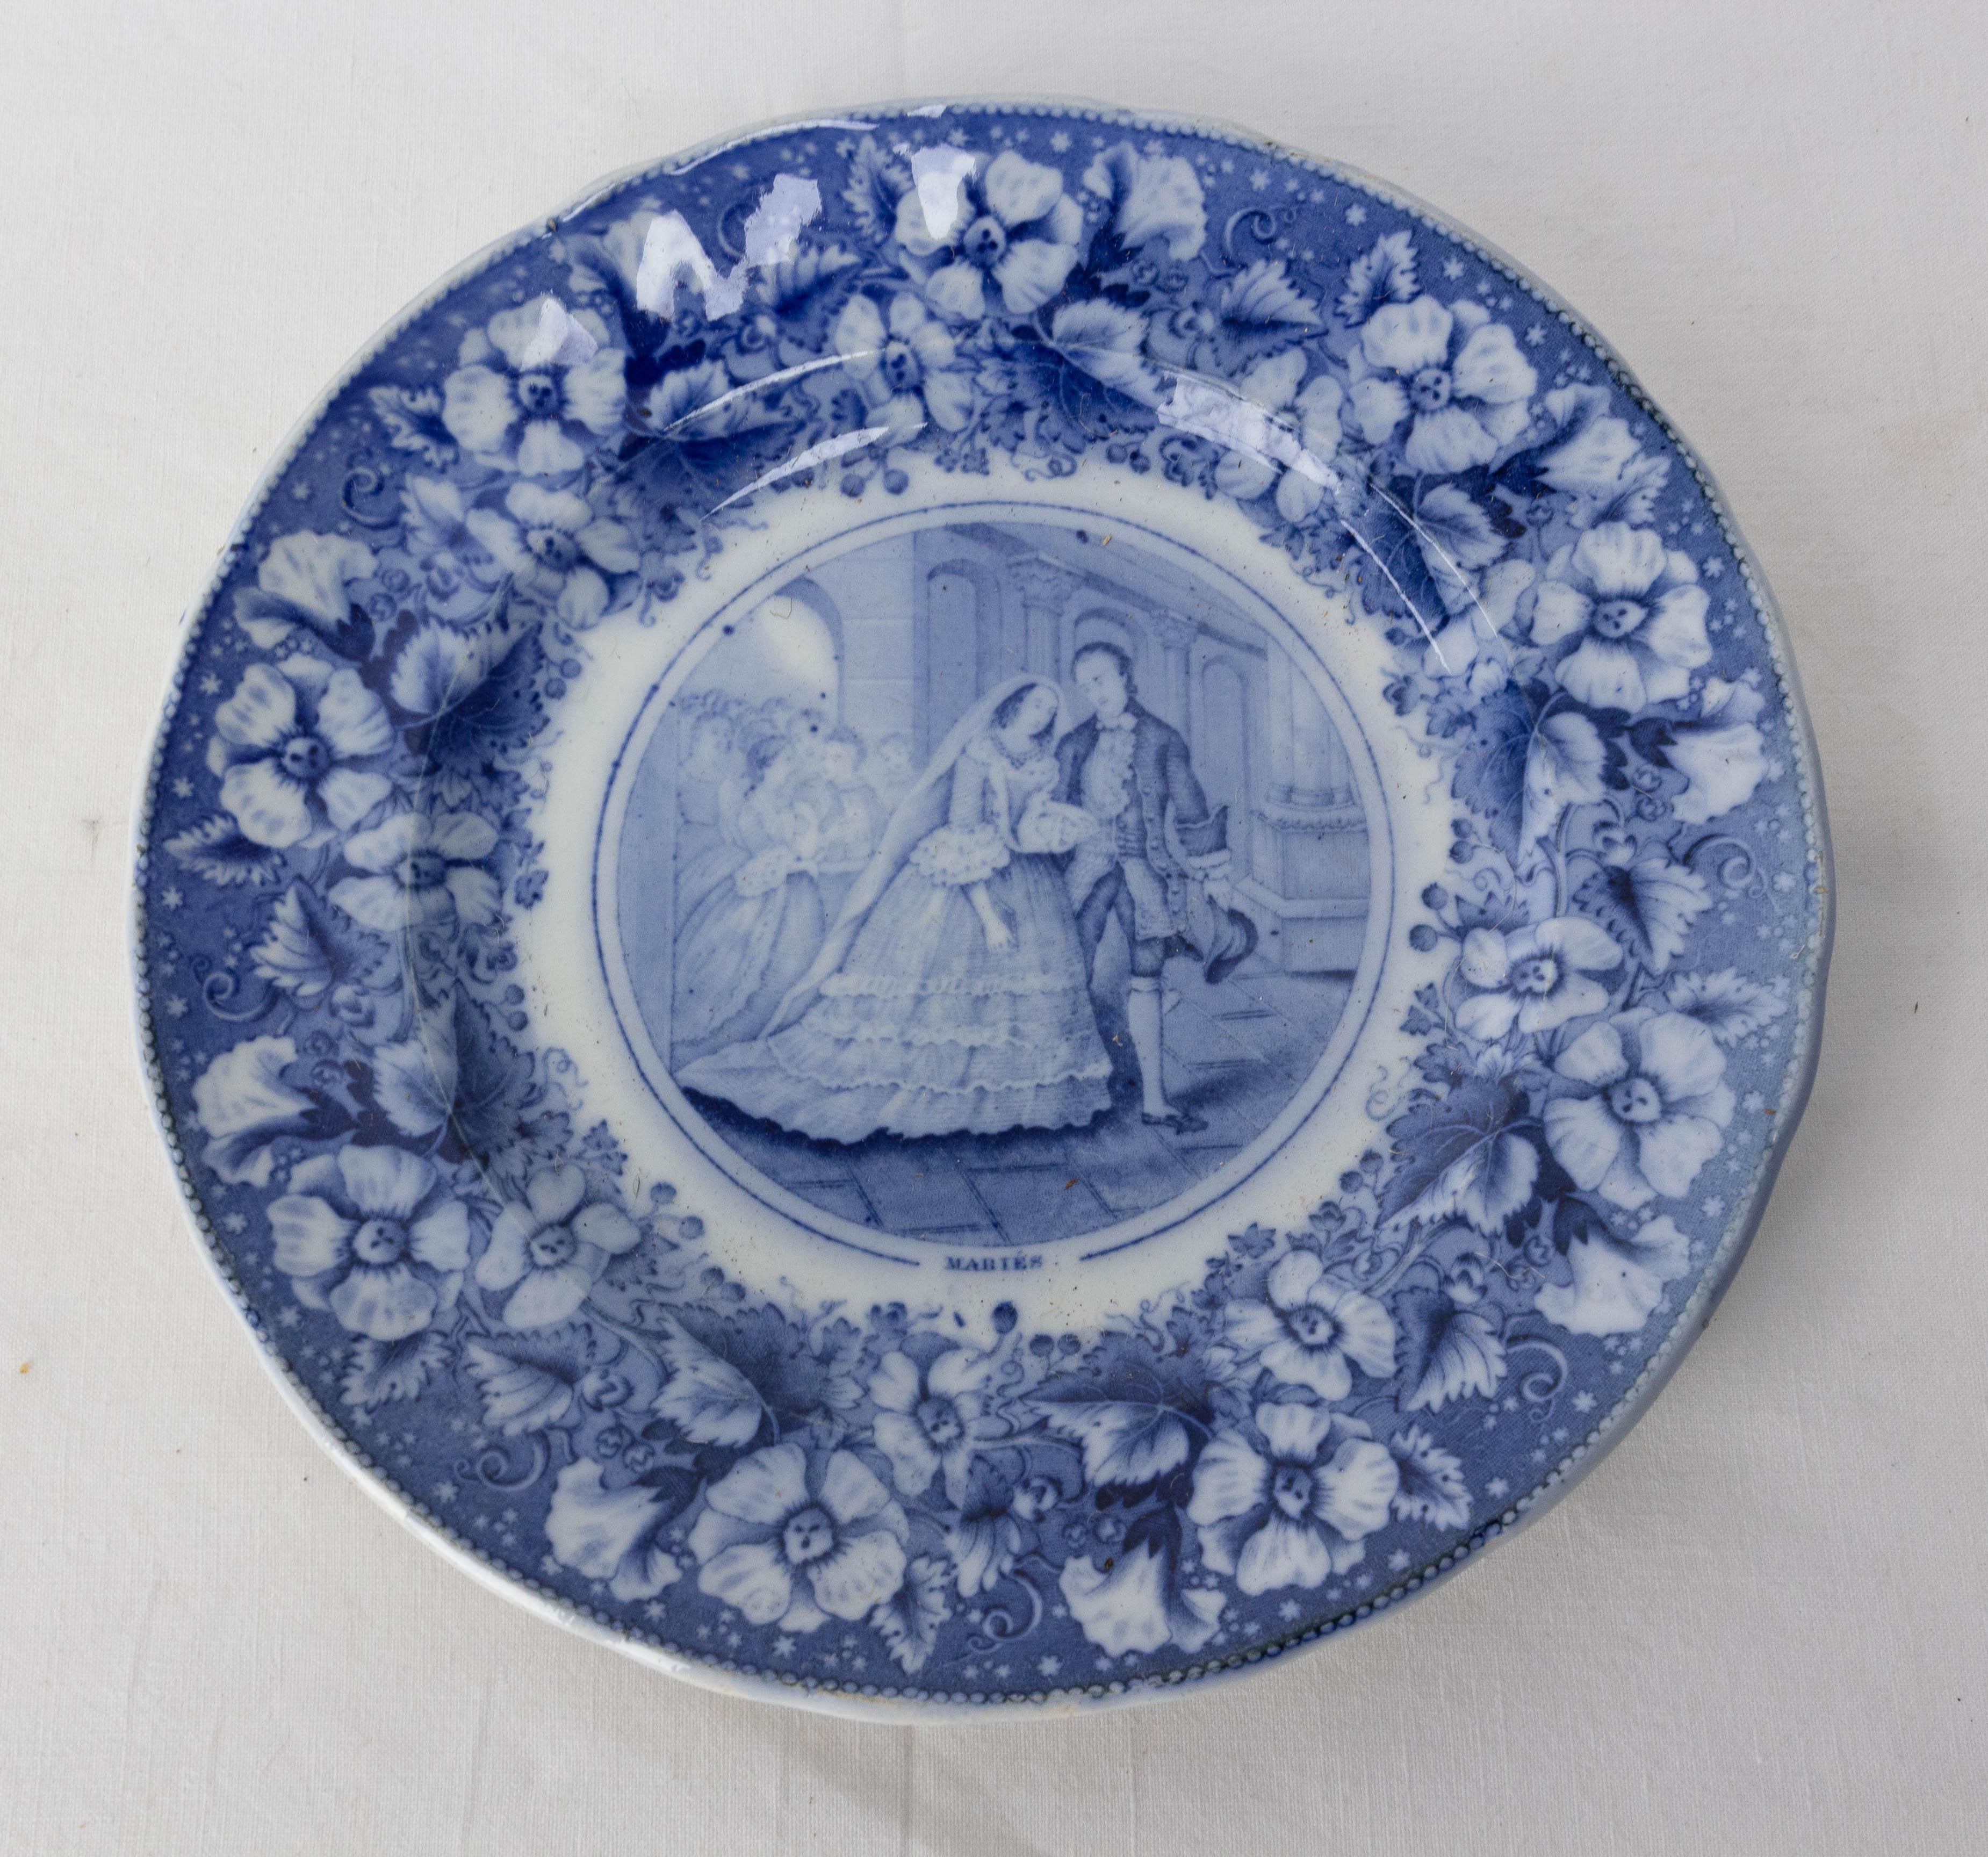 French faience plate, made in the manufacture of Jules Vieillard and Compagnie in the late 19th century.
This historiated plate representes a wedding scene. It was offered to the precedent owner by his wife for their twentieth wedding anniversary.